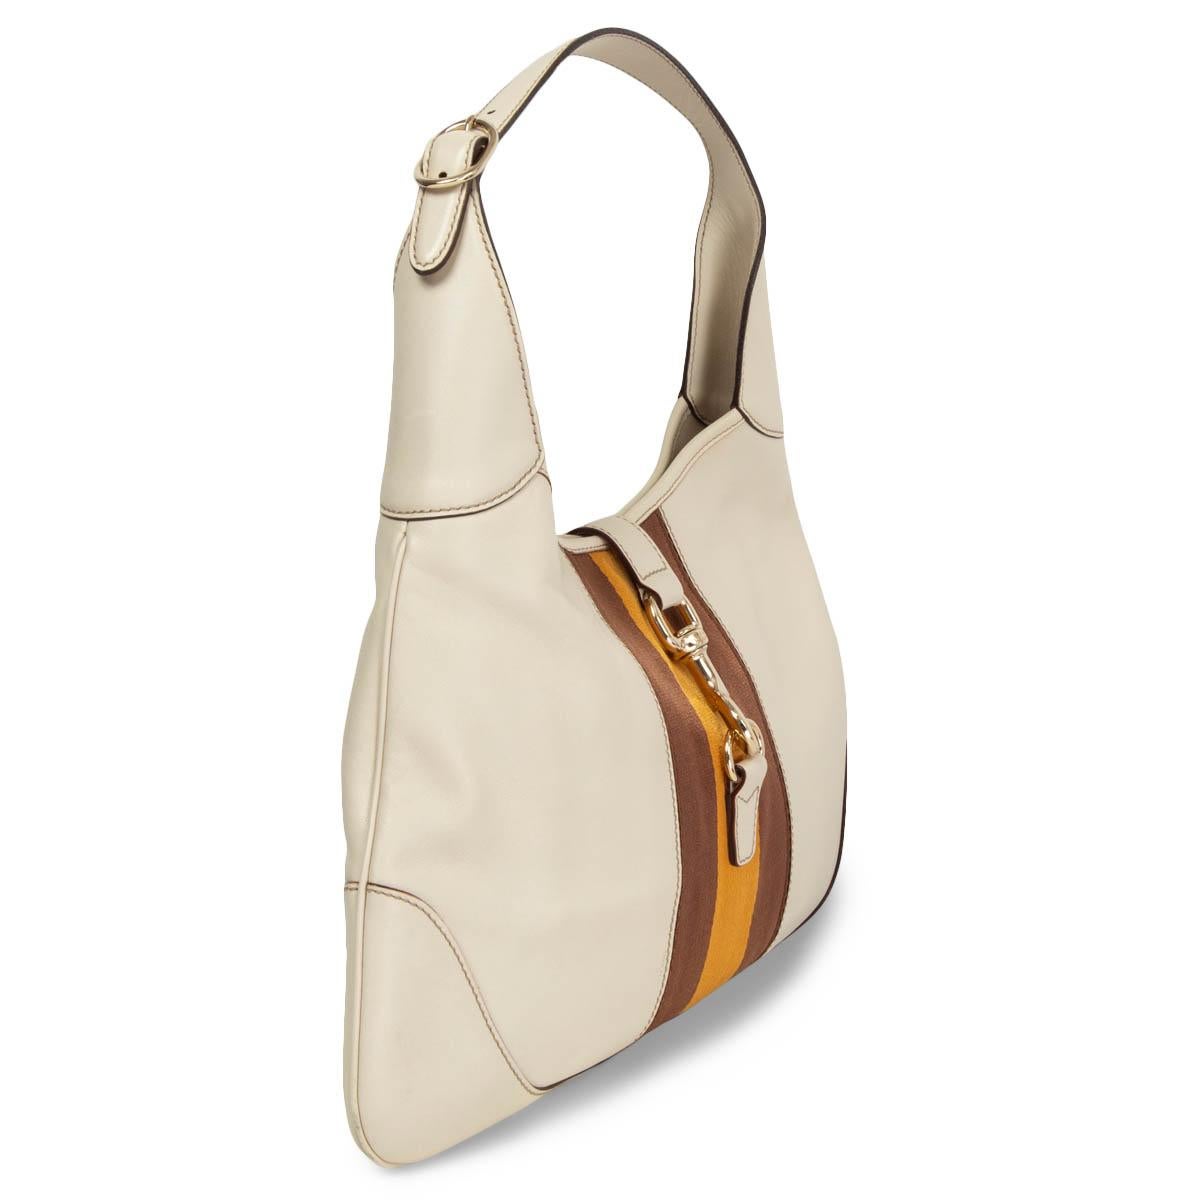 100% authentic Gucci Jackie O Bouvier Medium hobo in off-white leather with signature web stripe in brown and ochre canvas. The bag features a light gold-tone metal closure. Lined in oatmeal canvas with one zipper pocket against the back and a small